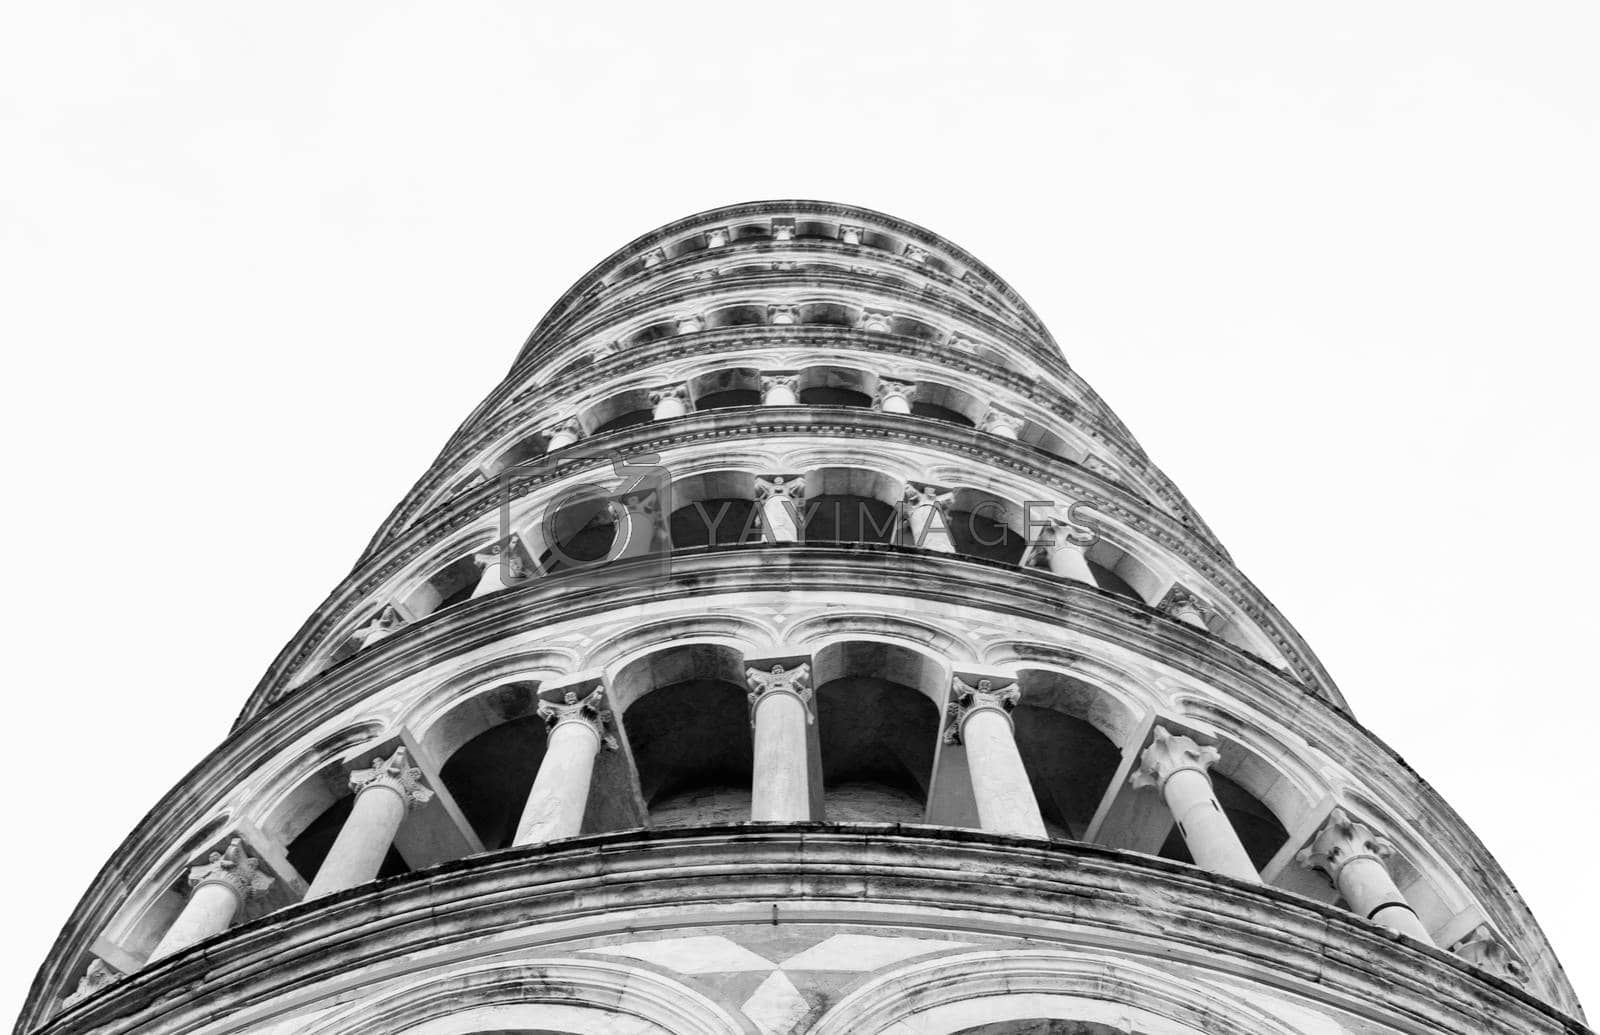 Royalty free image of Tower of Pisa view from the bottom by contas